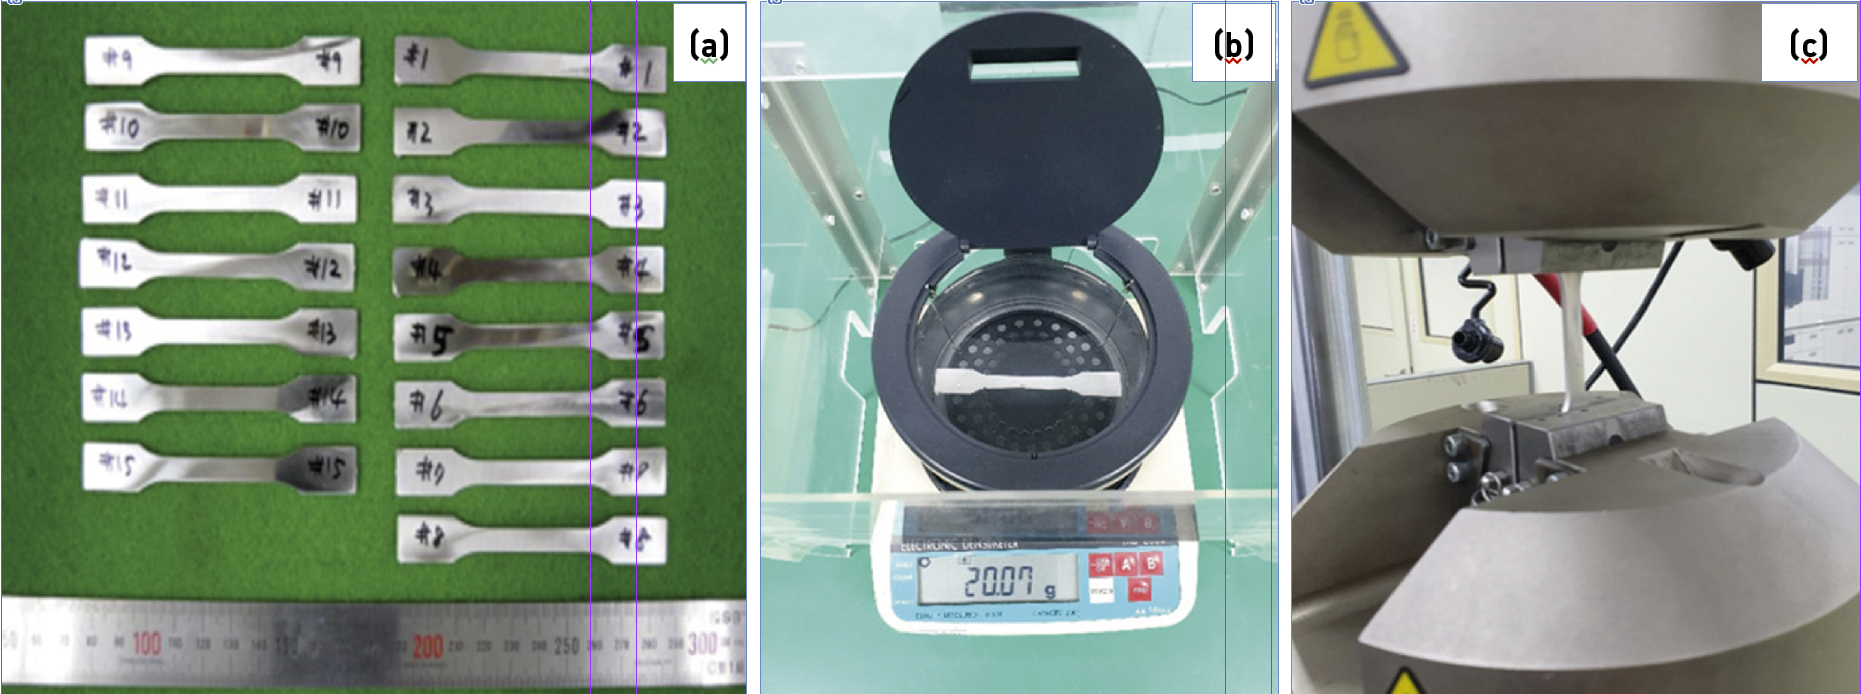 Fig. 1 Process of measuring mechanical properties: (a) specimens produced by MIM process, (b) electronic densimeter (md-200 s), (c) servohydraulic fatigue testing system (Instron 880) (From paper: ‘Characterization of Mechanical properties and grain size of stainless steel 316L via metal injection molding’ by In-Seok Hwang et al, Materials, March 7, 2023, Vol 16, 2144, 12 pp)